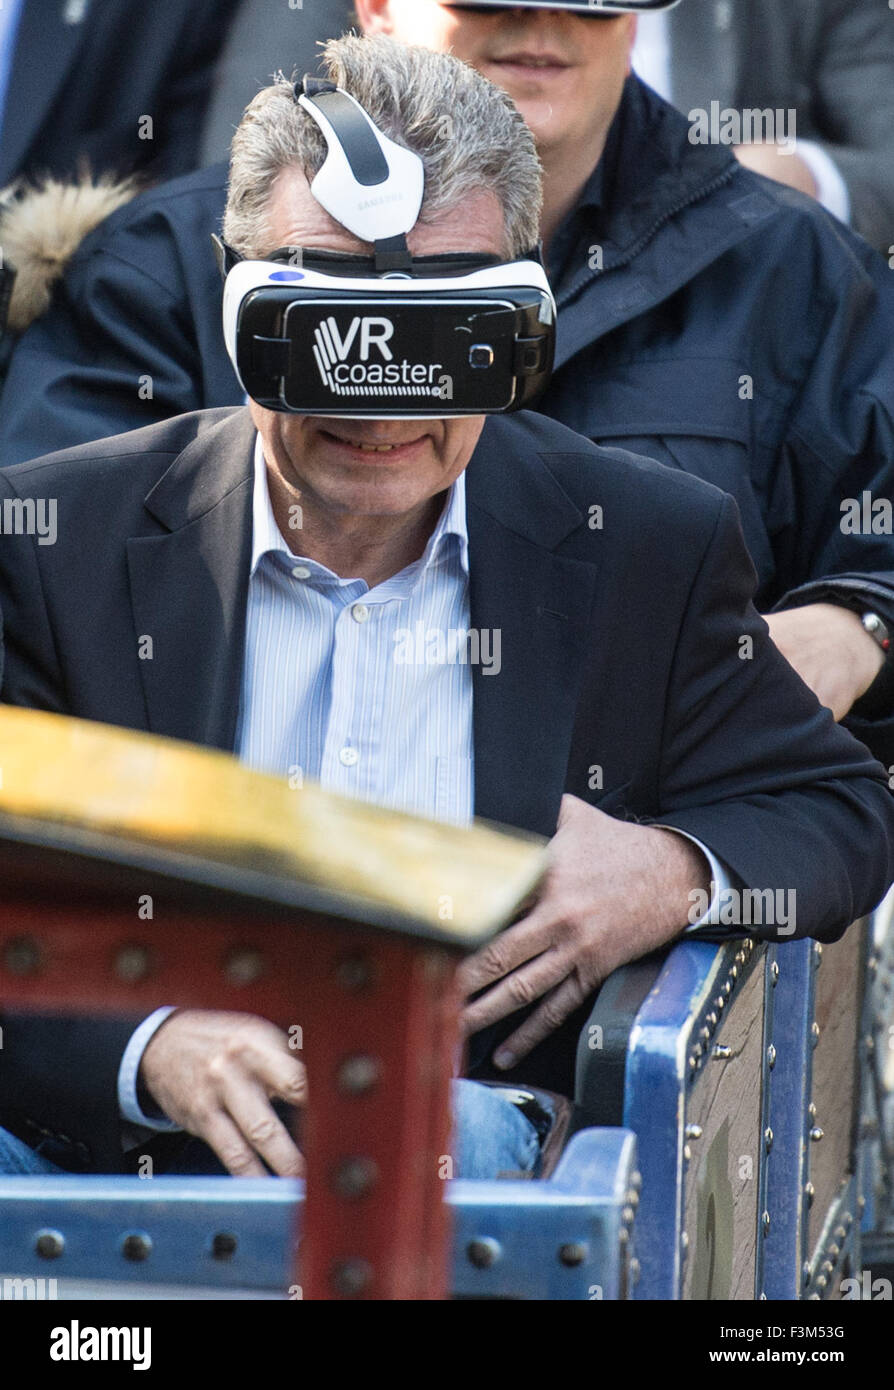 Rust, Germany. 9th Oct, 2015. Guenther Oettinger (CDU), EU Comissioner for Digital Economy and Society wearing Virtual Reality (VR) glasses by Oculus at the Europa Park in Rust, Germany, 9 October 2015. In the VR goggles new virtual worlds can be created in the future. The wearer then moves live in the rollercoaster "Alpenexpress" but has visually experienced new virtual worlds Photo: PATRICK SEEGER/dpa/Alamy Live News Stock Photo